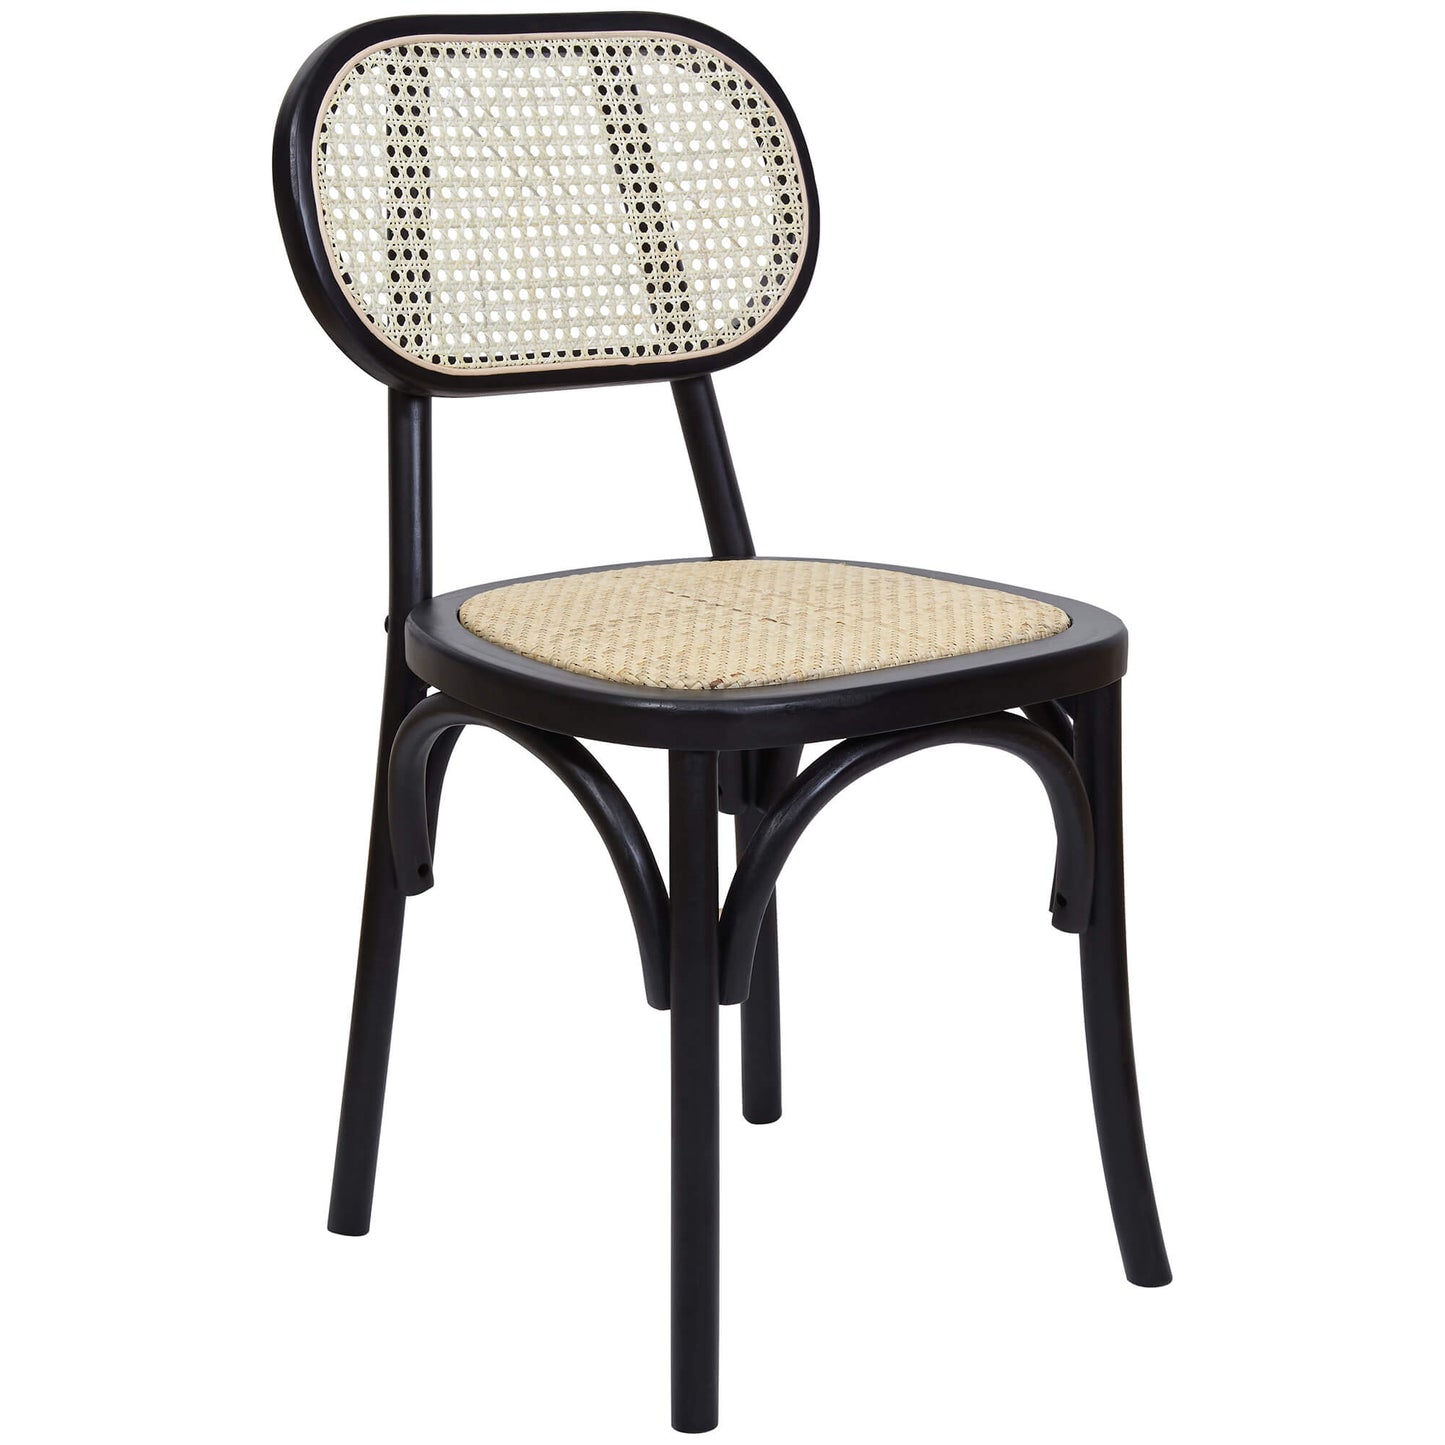 Denver | Black, Natural Country Wooden Rattan Dining Chairs | Set Of 2 | Black